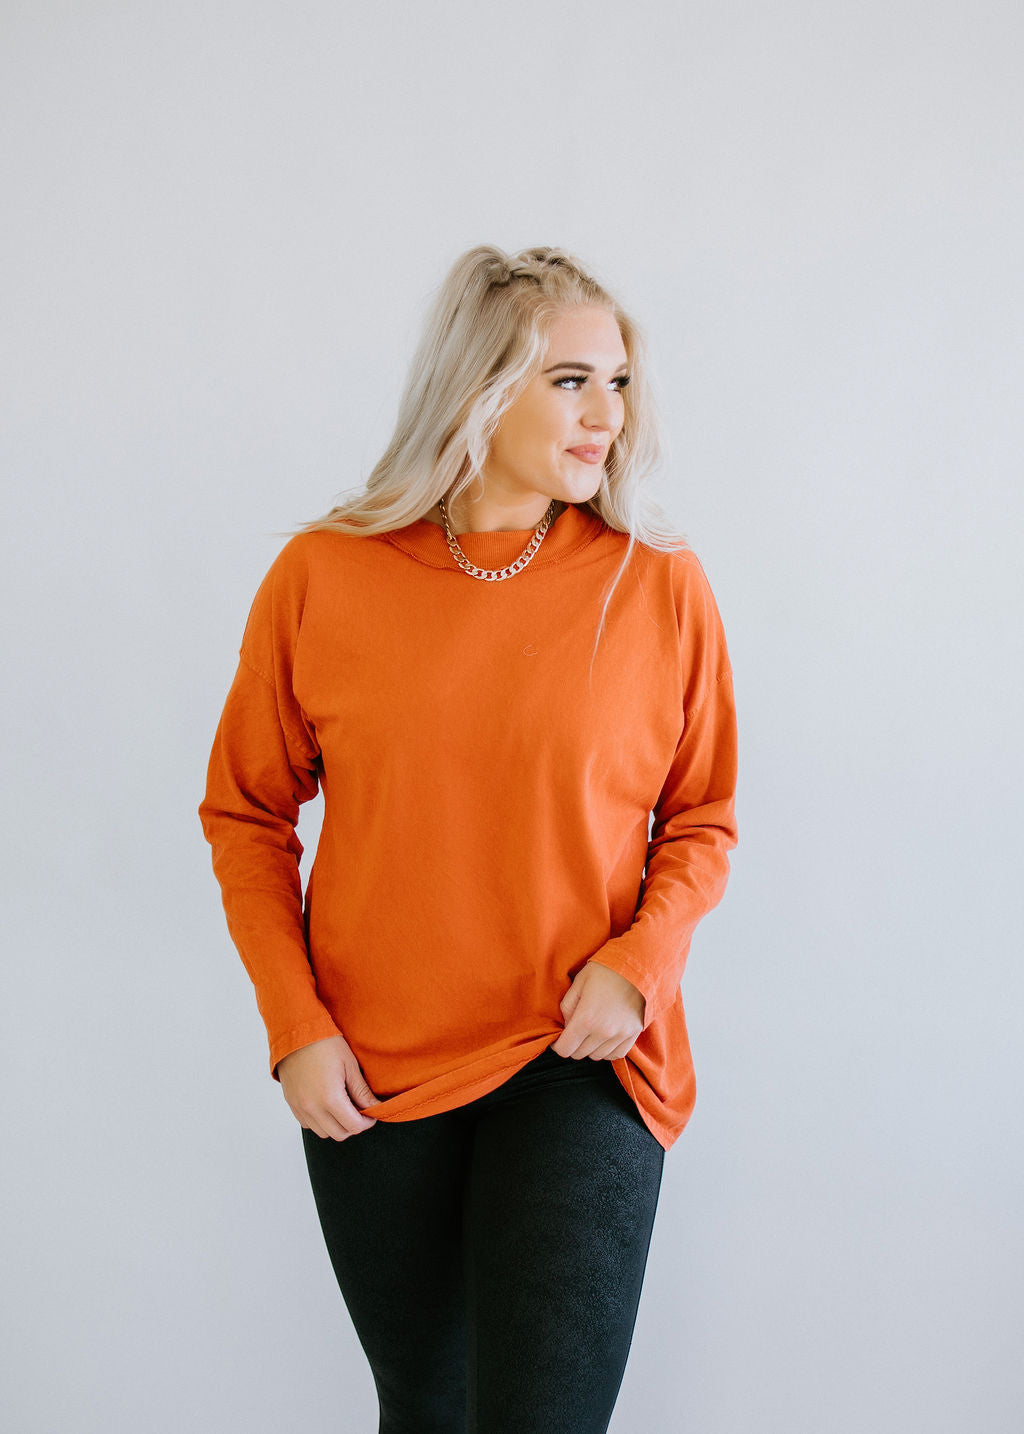 Persey Mineral Wash Tunic